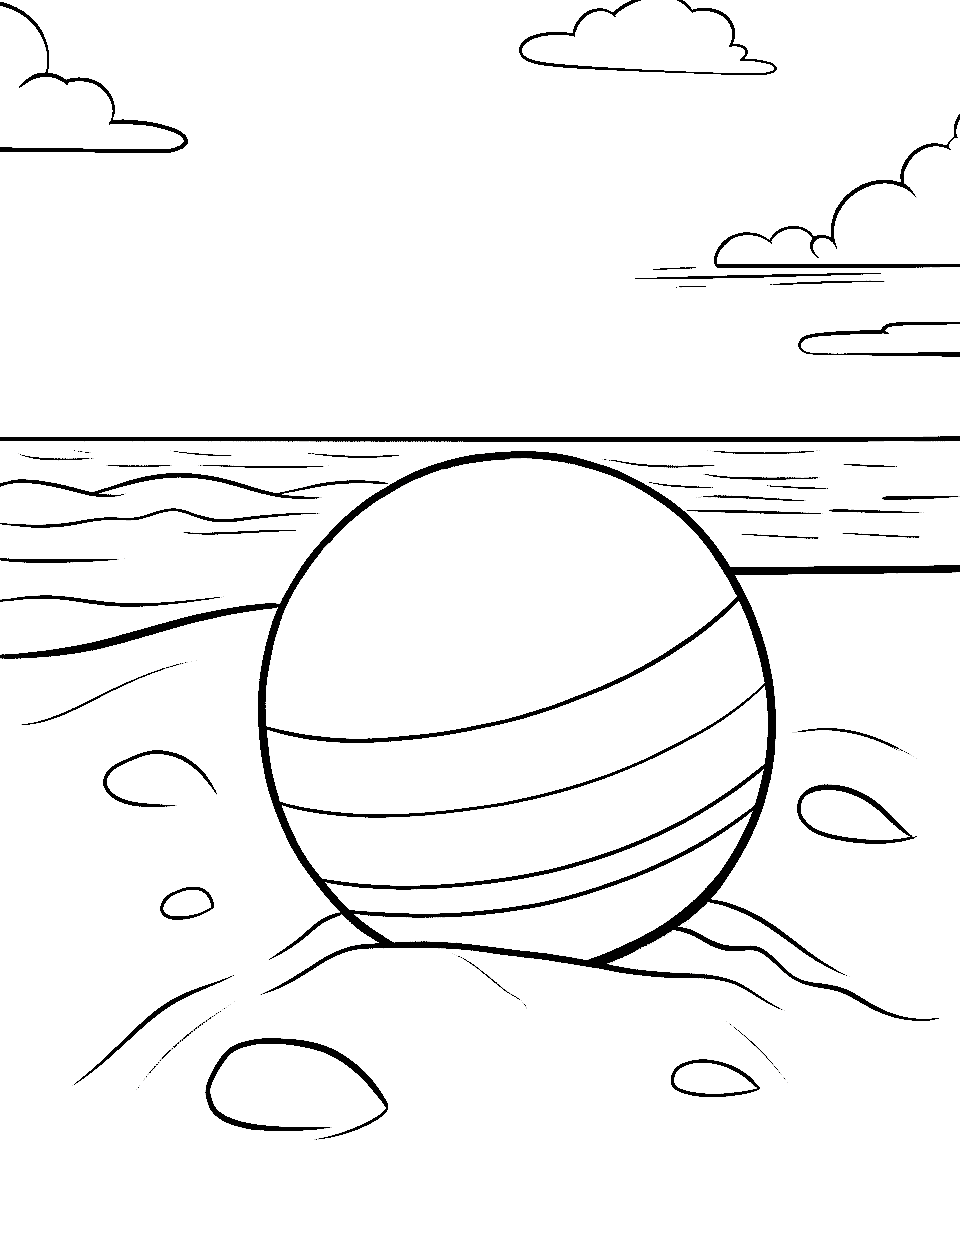 Beach coloring pages free printable sheets